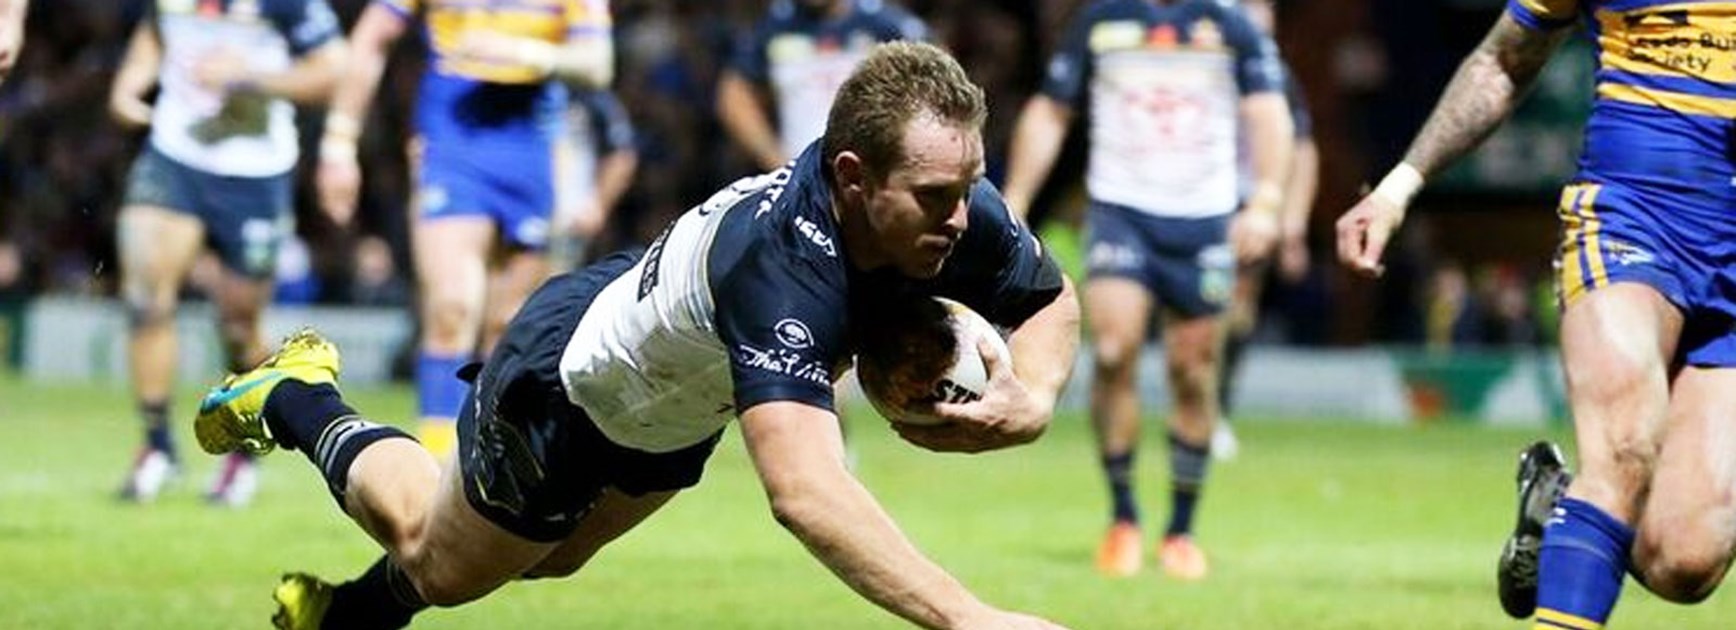 Michael Morgan scores for the Cowboys against Leeds in the World Club Challenge.